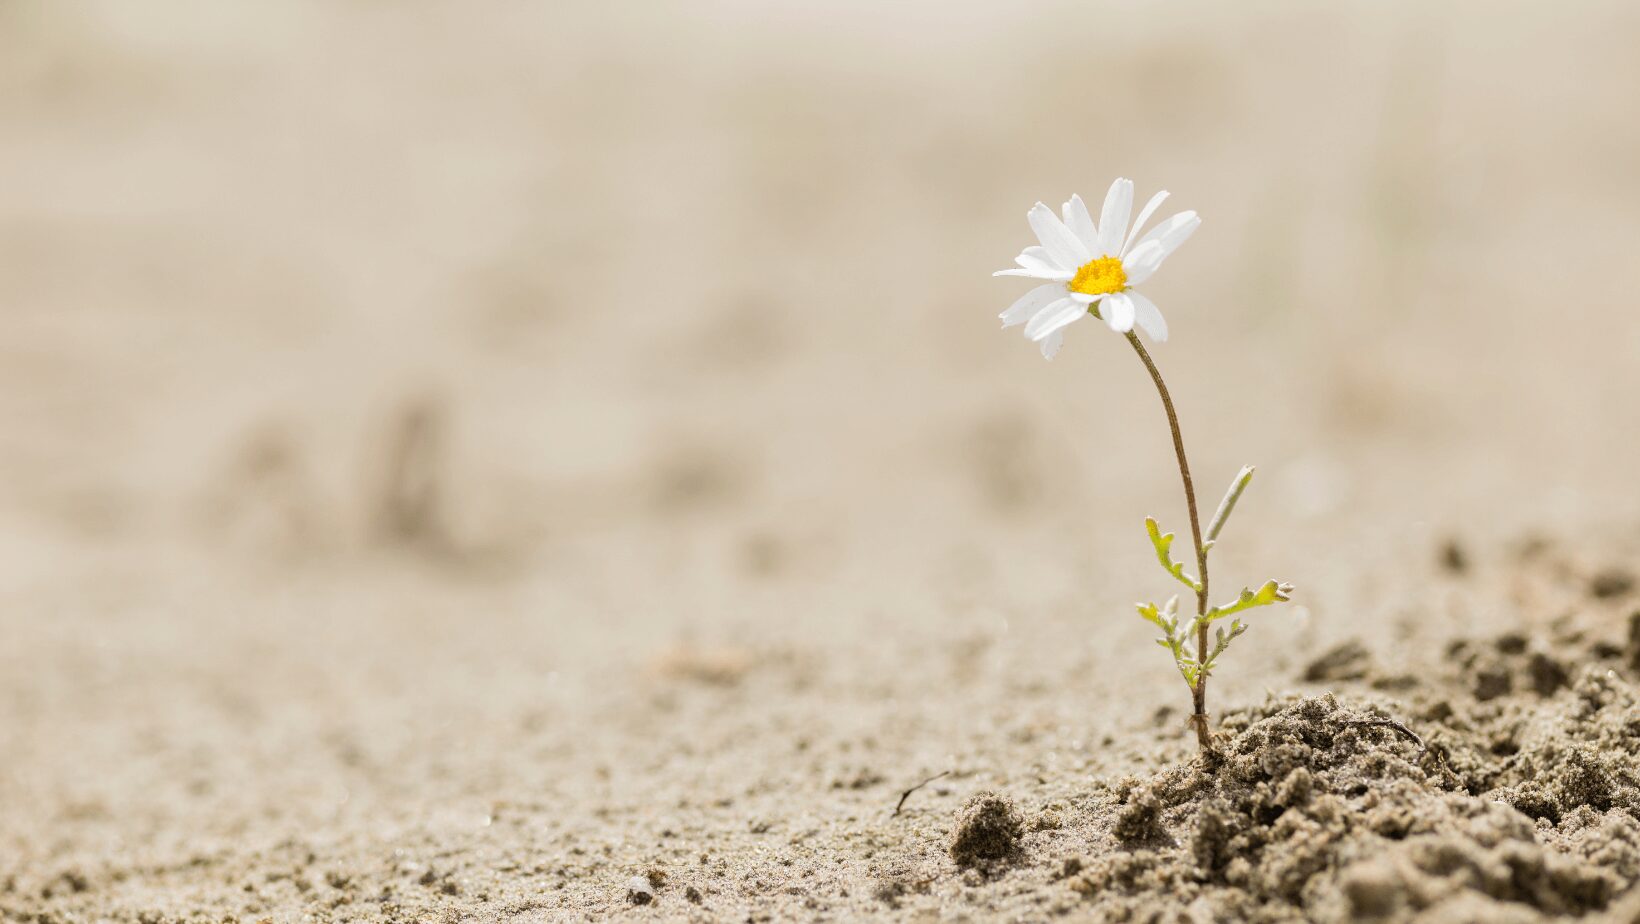 symbol of resilience because a flower blooms on the otherwise dried and barren ground